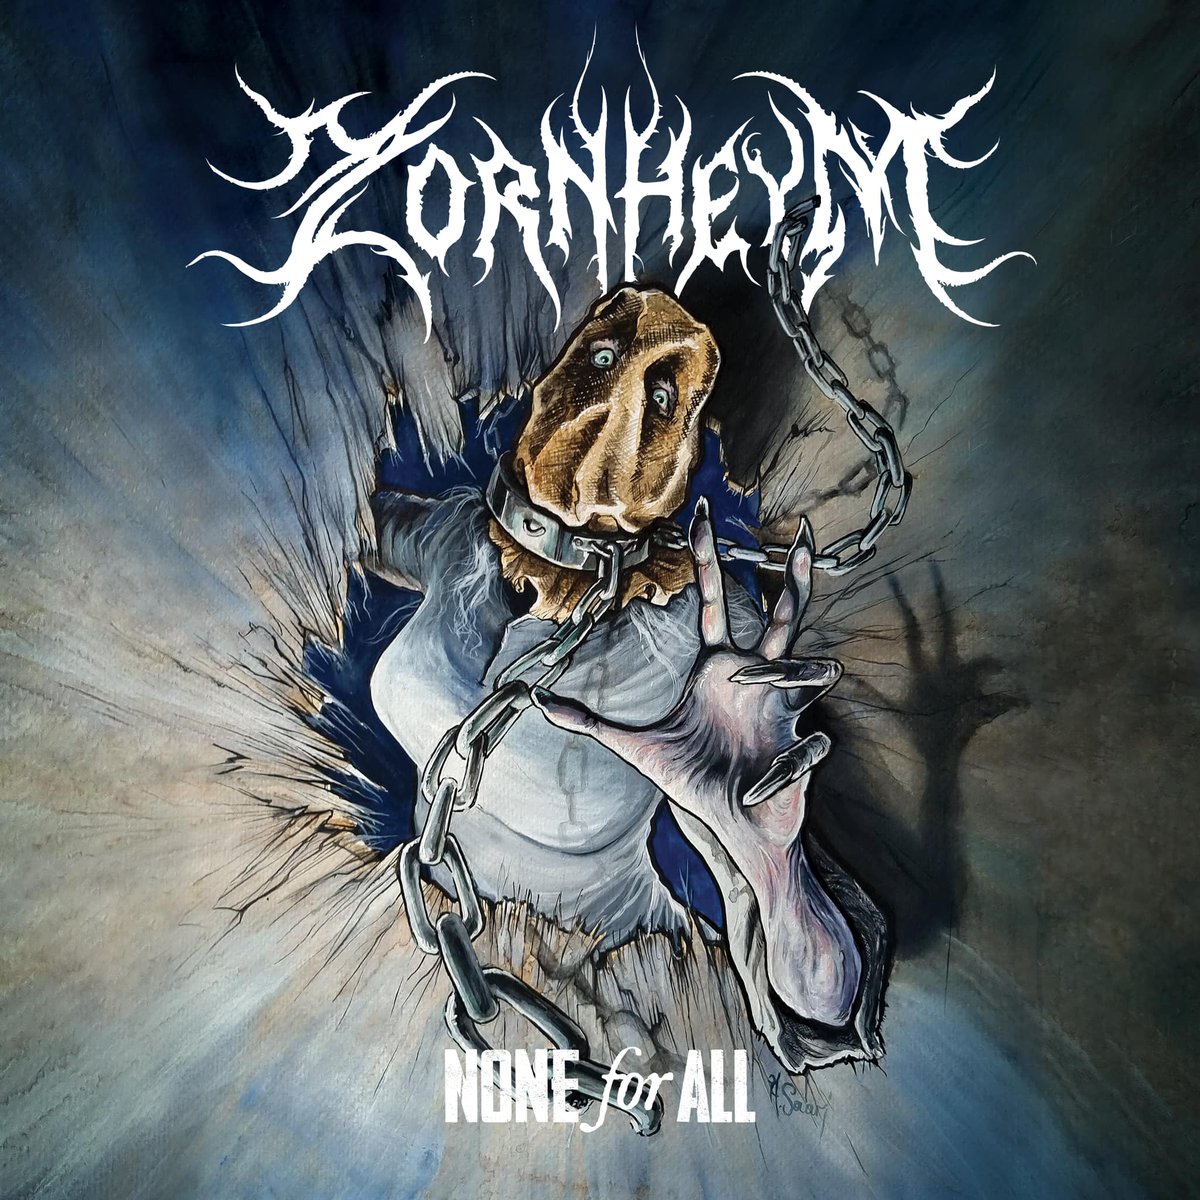 @Zornheym ZORNHEYM 🇸🇪 | Symphonic Extreme Metal | Repost! | 🤘💀🤘
”None For All” out on the 17th of May on @nobledemonrec .
Artwork by: Art Saari
Recorded and mixed by Sverker Widgren at Wing Studios